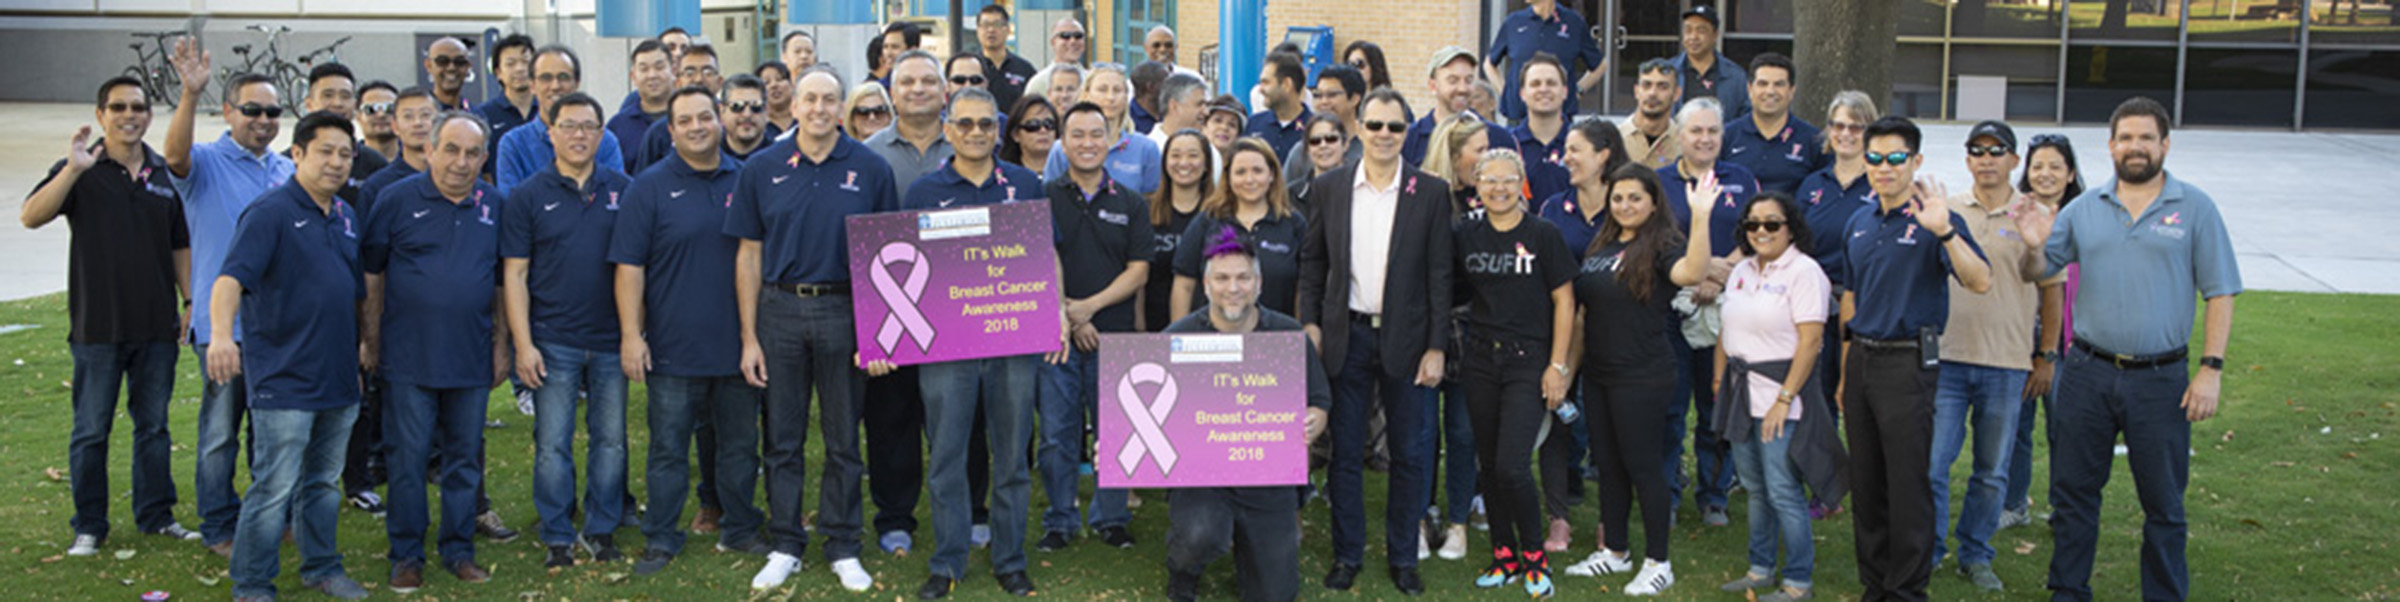 IT Staff at Walk for Breast Cancer Awareness